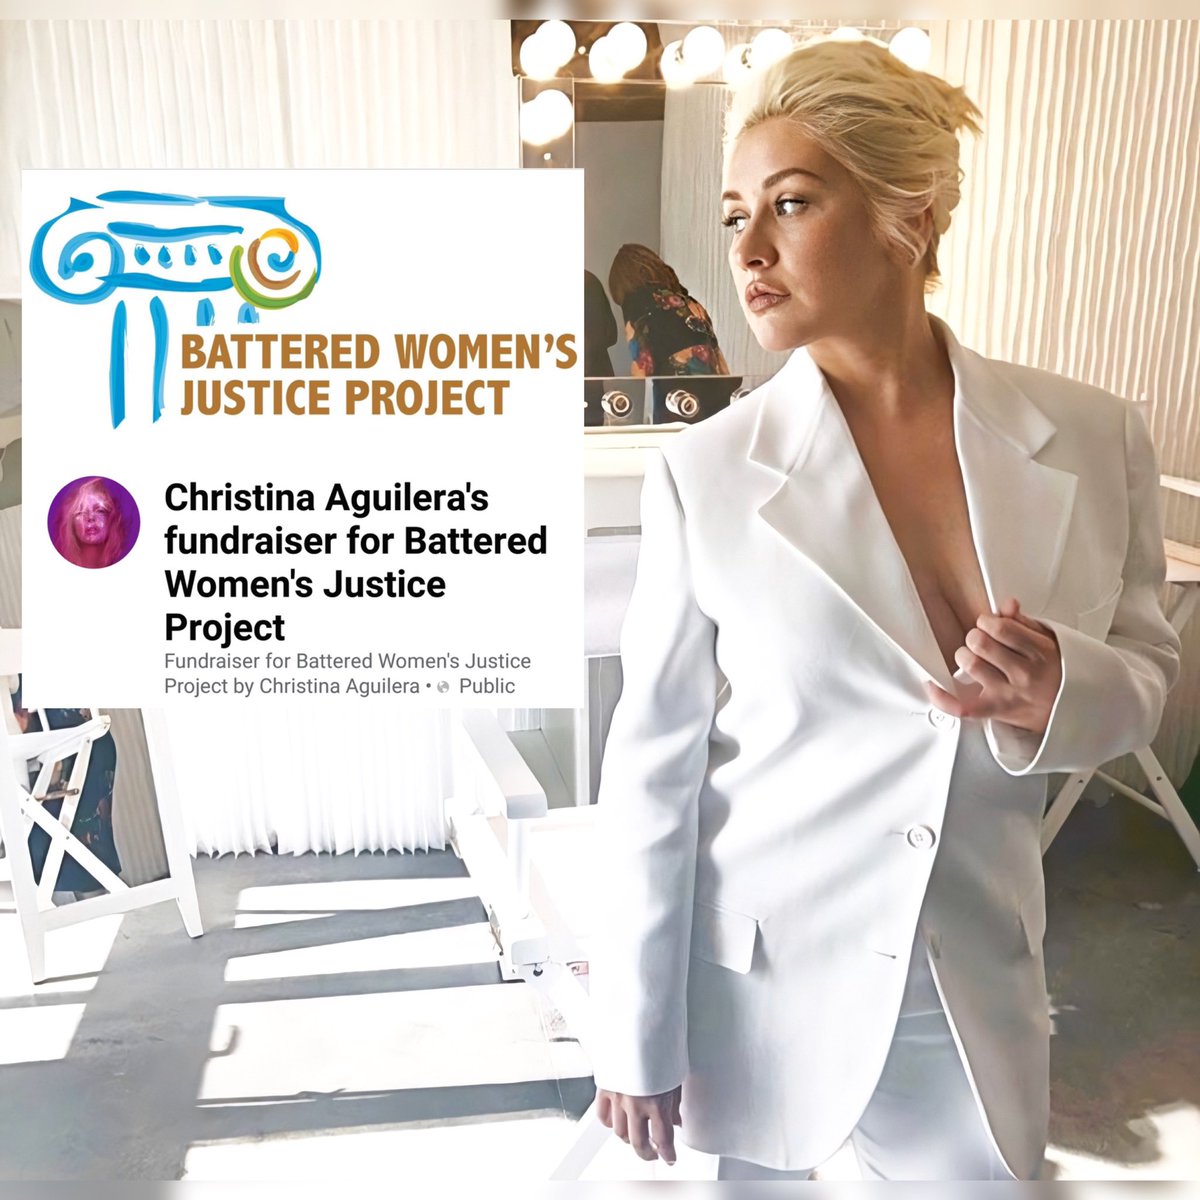 In 2018 Christina Aguilera created a fund raiser and encouraged her followers to consider joining her for  #GivingTuesday to help support the Battered Women’s Justice Project.